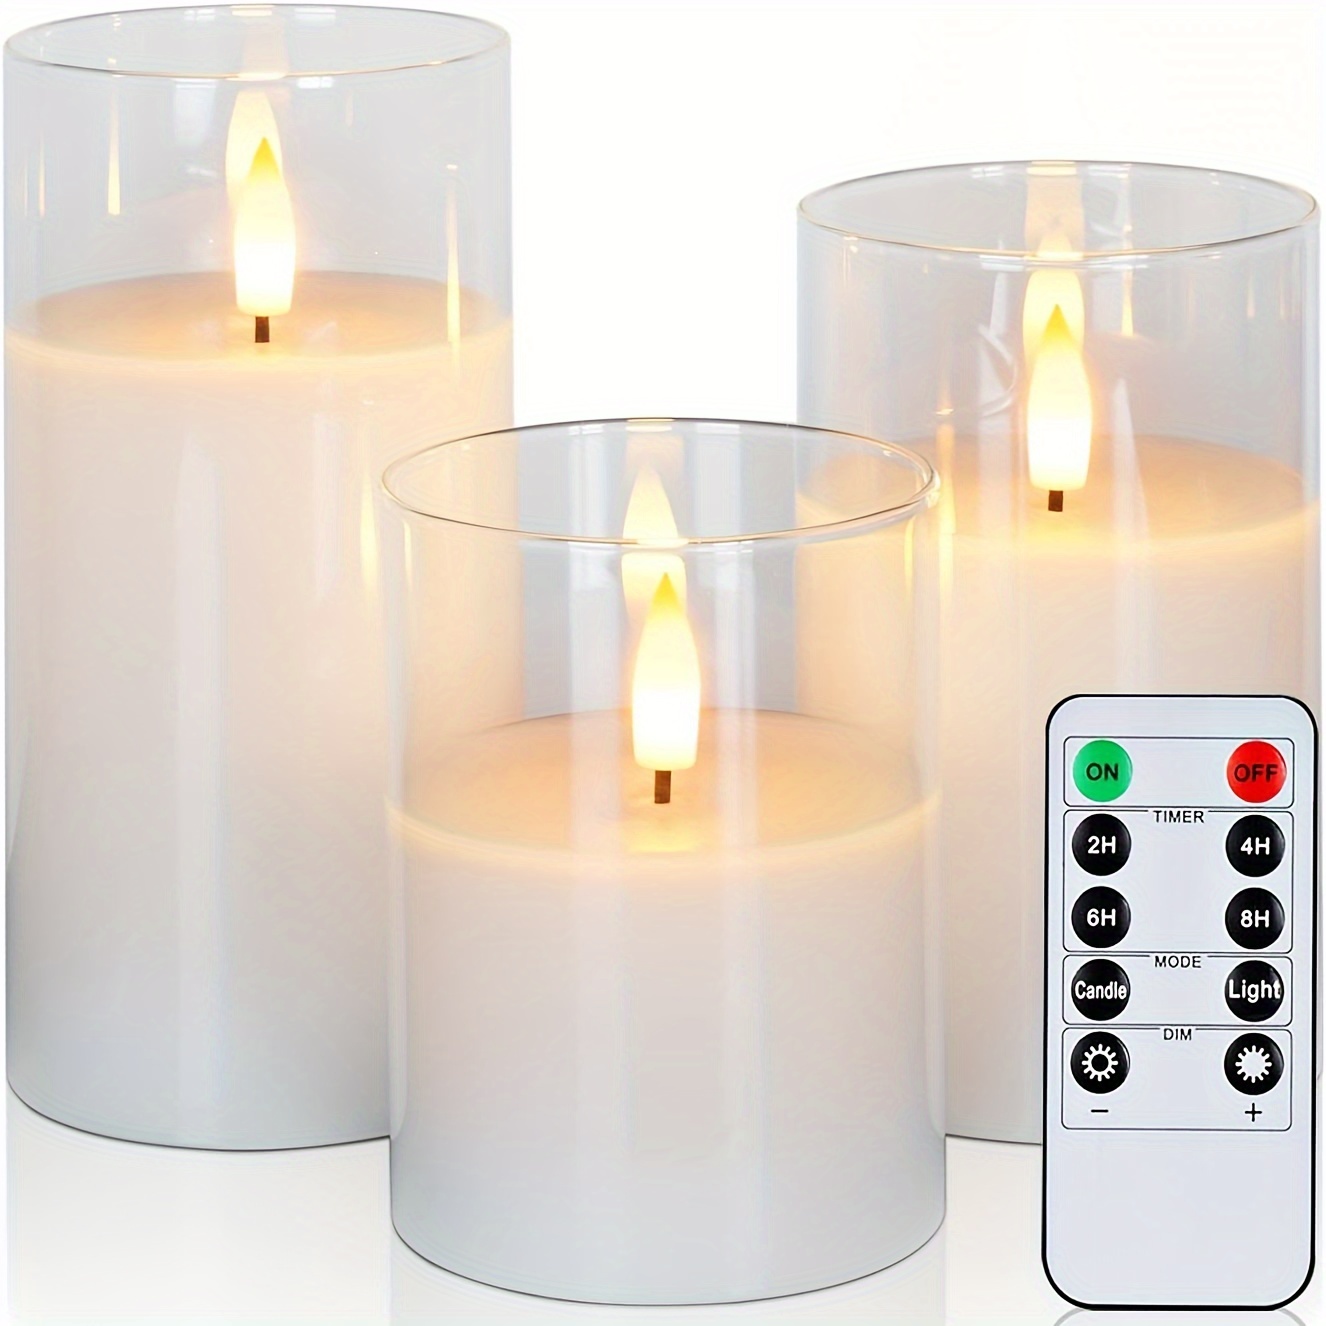 

Clear Glass Flameless Candles Battery Operated With Timer, Remote Control, Led Pillar Candles Battery Powered, Pure White Wax, D3 H4 5" 6", Set Of 3